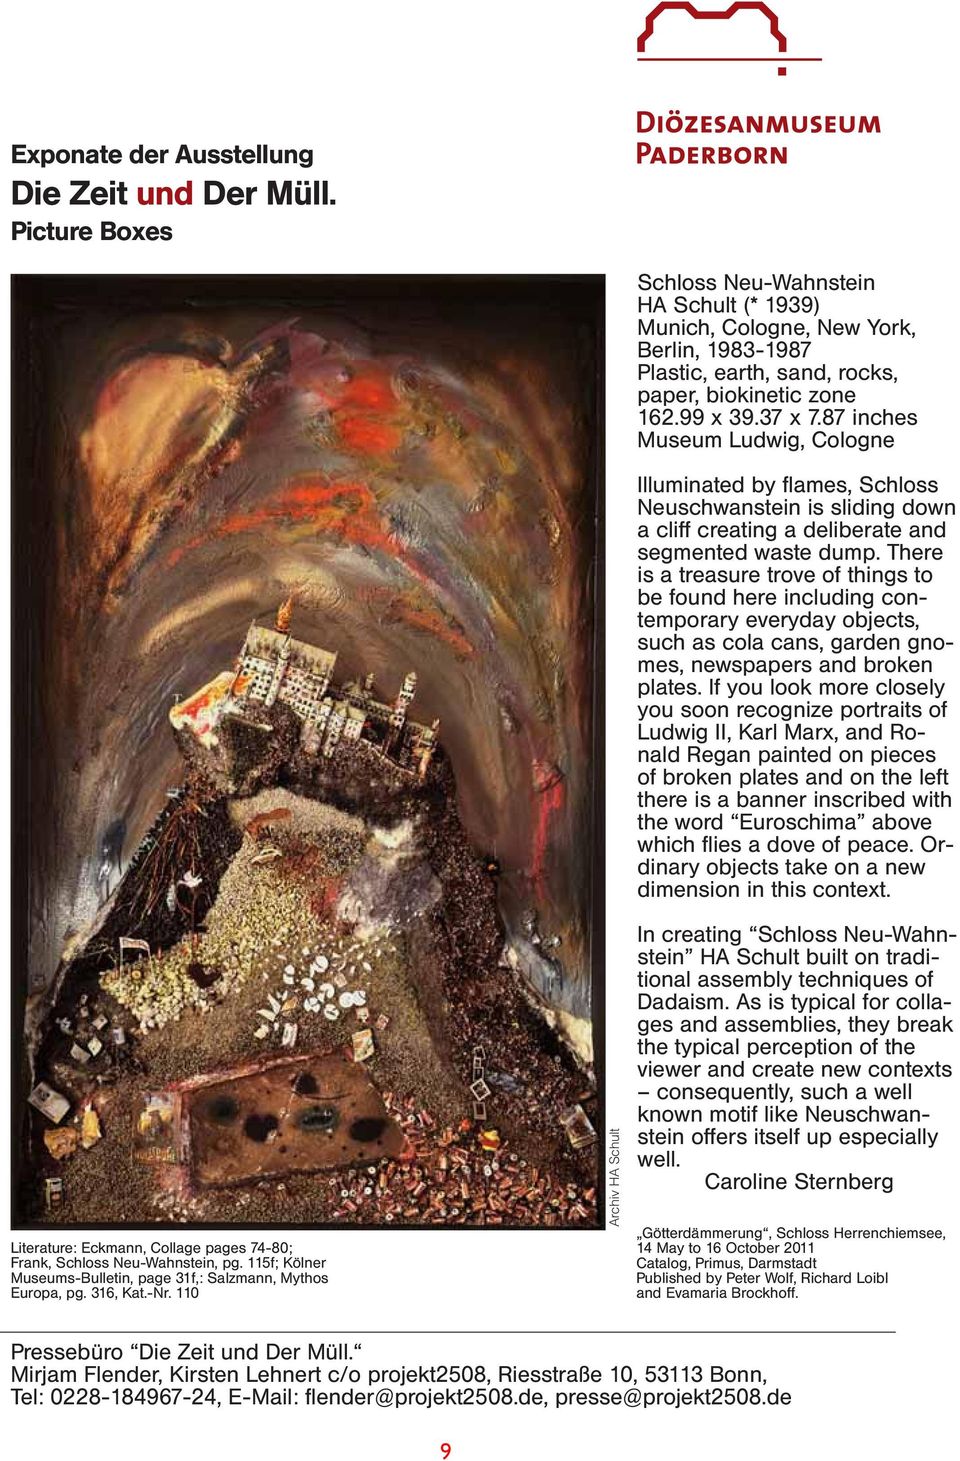 87 inches Museum Ludwig, Cologne Illuminated by flames, Schloss Neuschwanstein is sliding down a cliff creating a deliberate and segmented waste dump.